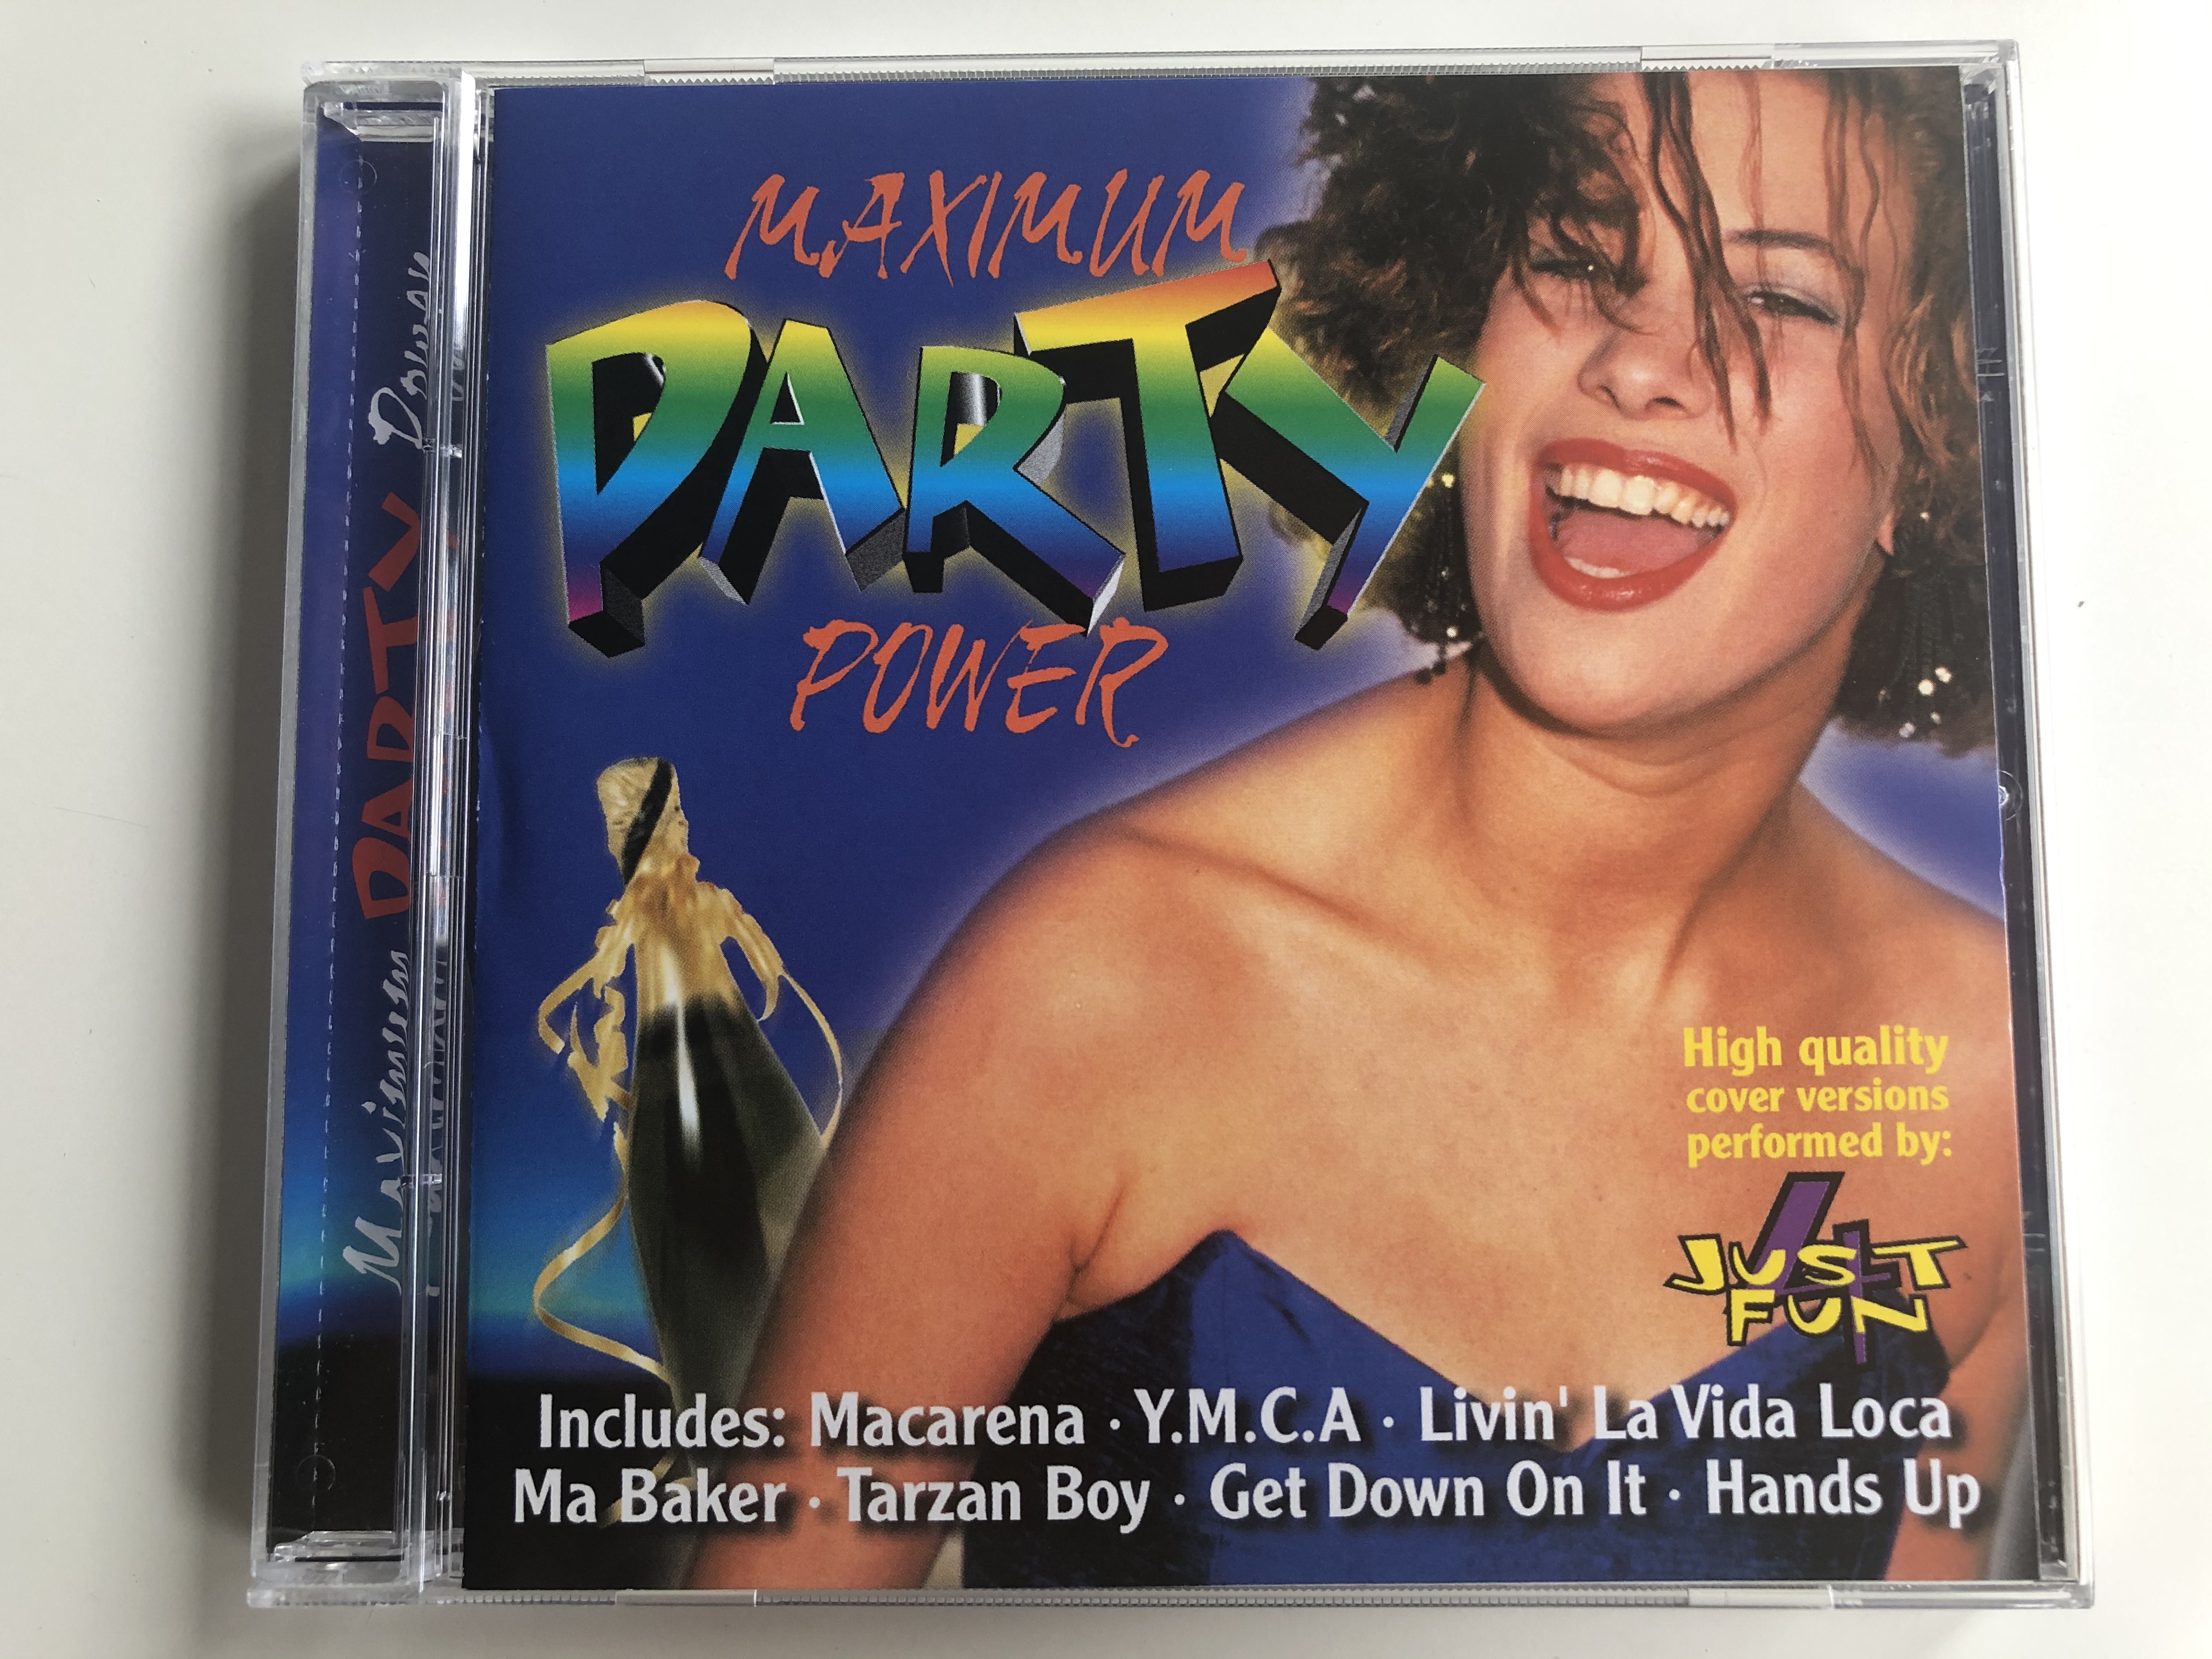 maximum-party-power-high-quality-cover-versions-performed-by-just-4-fun-includes-macarena-y.m.c.a.-livin-la-vida-loca-ma-baker-tarzan-boy-get-down-on-it-hands-up-maximum-collection-audio-1-.jpg